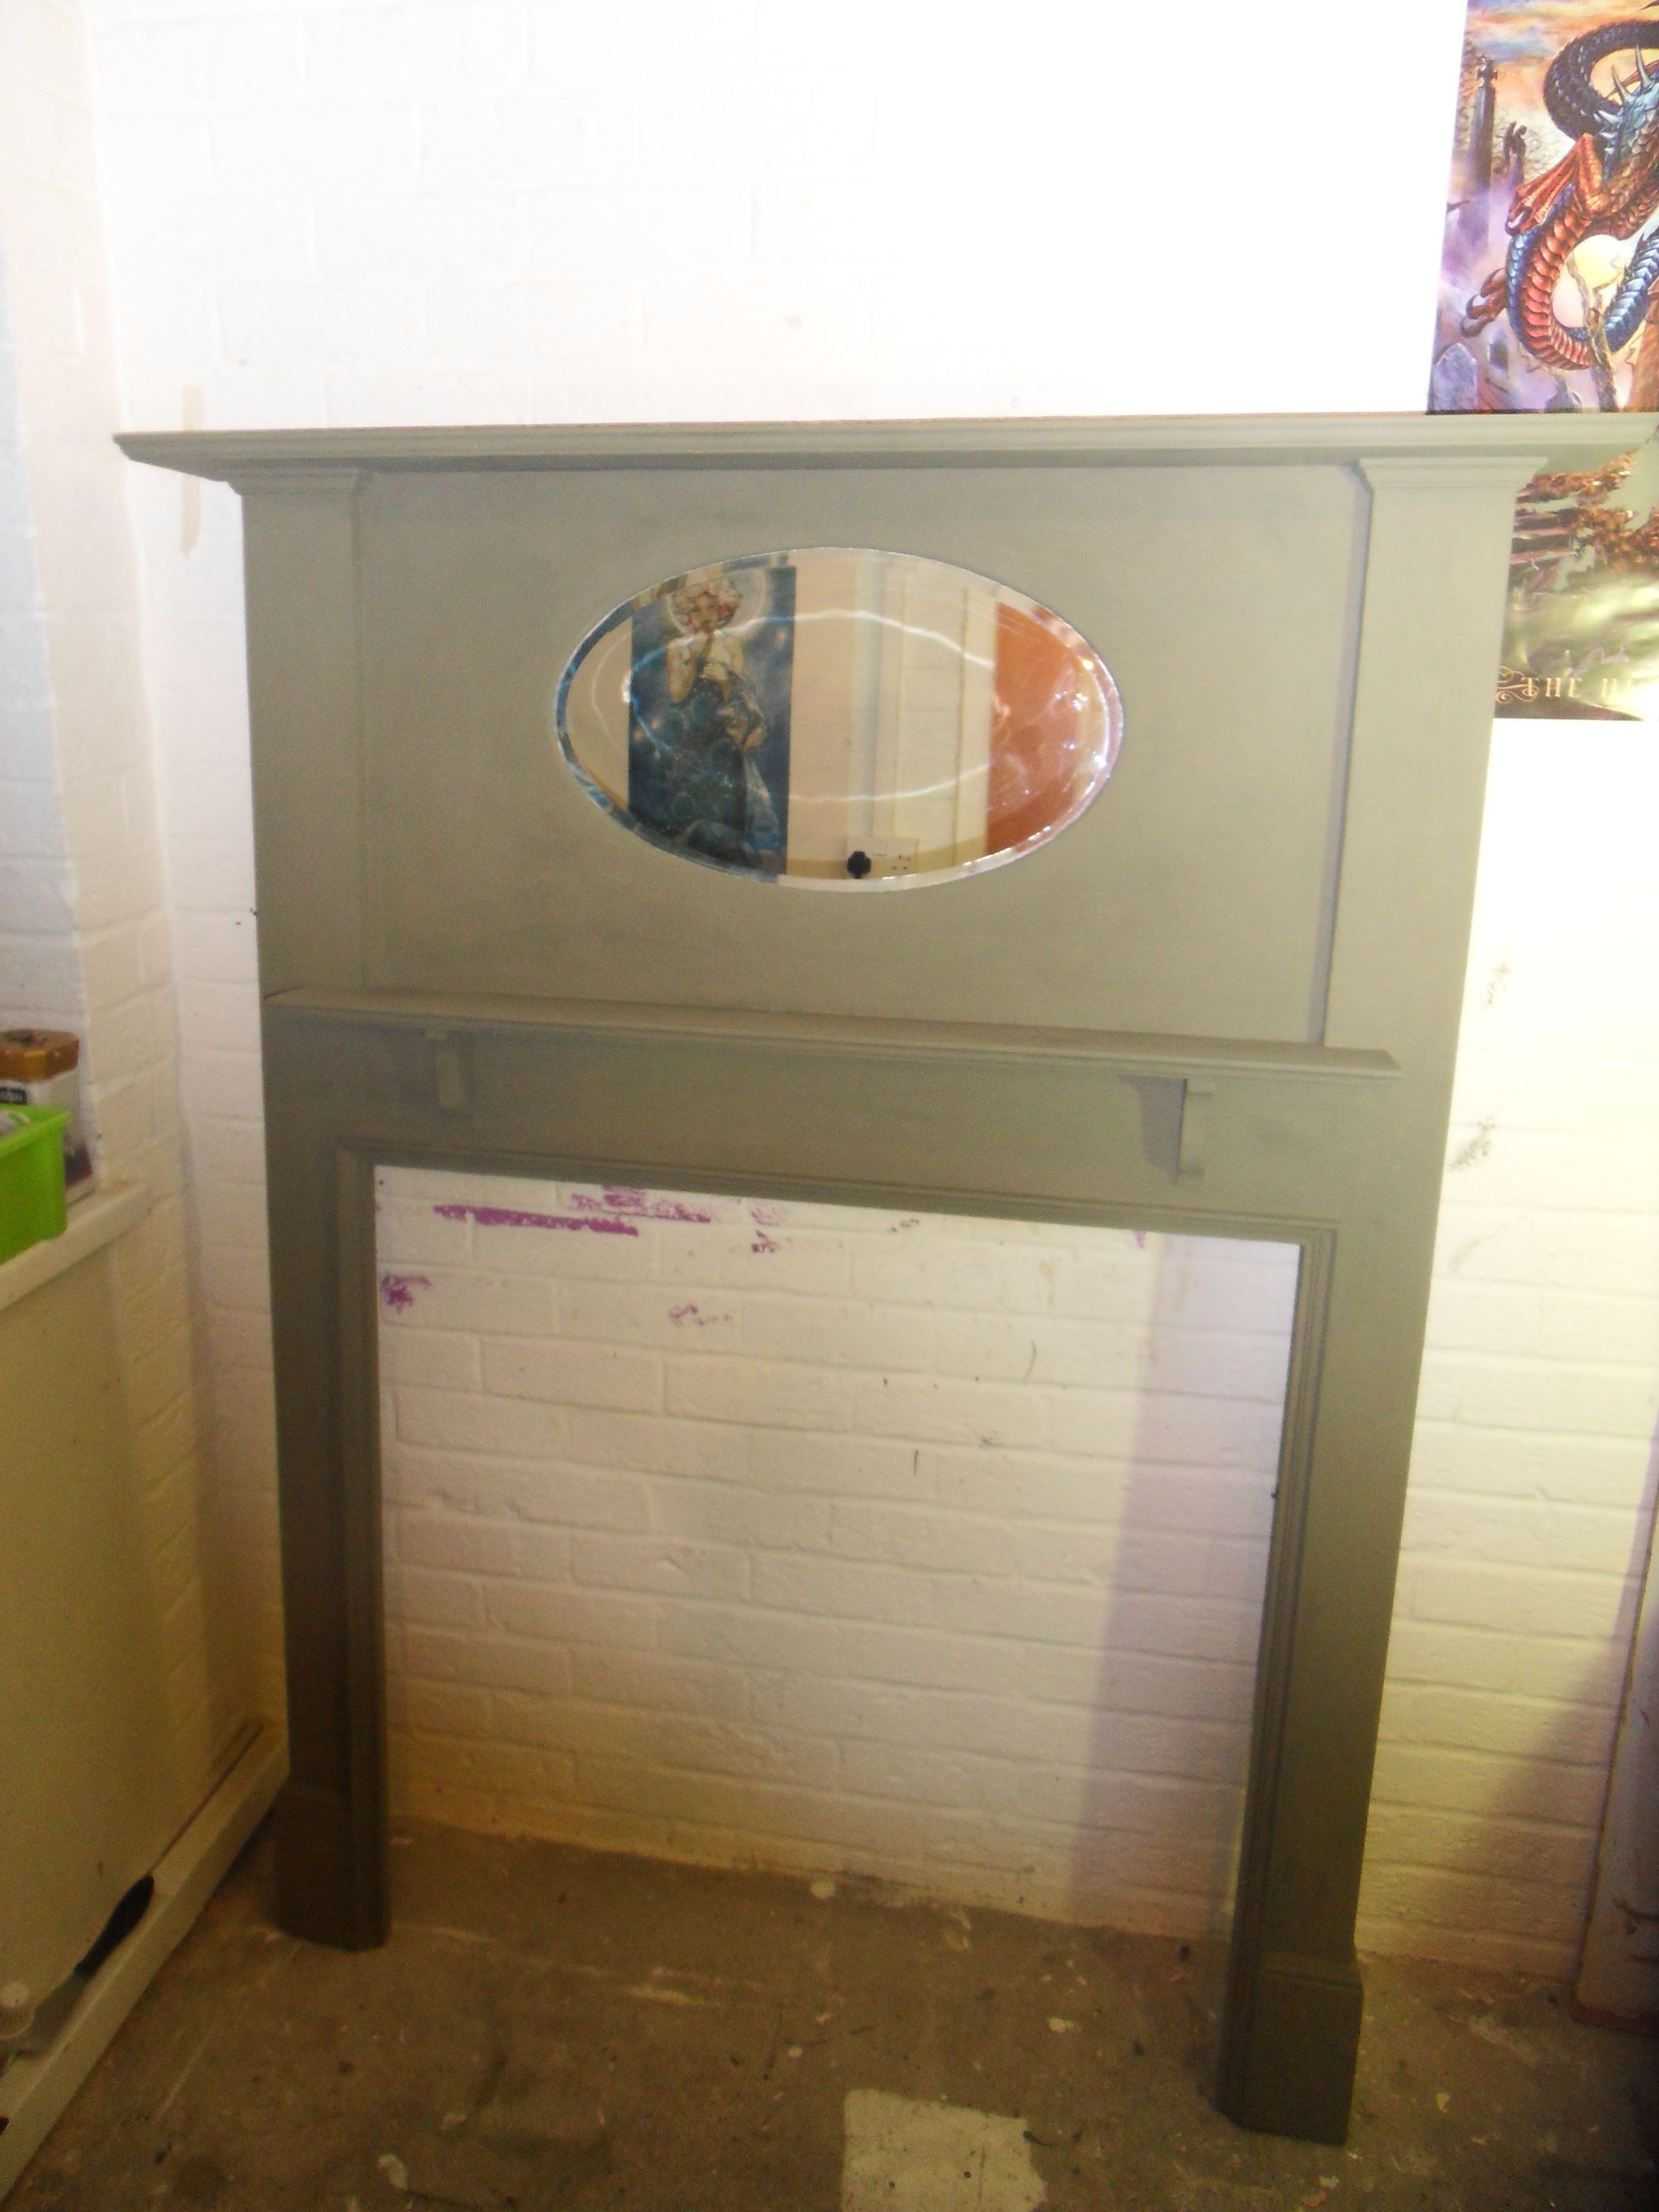 Antique Fireplace Mantel with Mirror New Vintage Fire Surround with Oval Mirror now Painted In